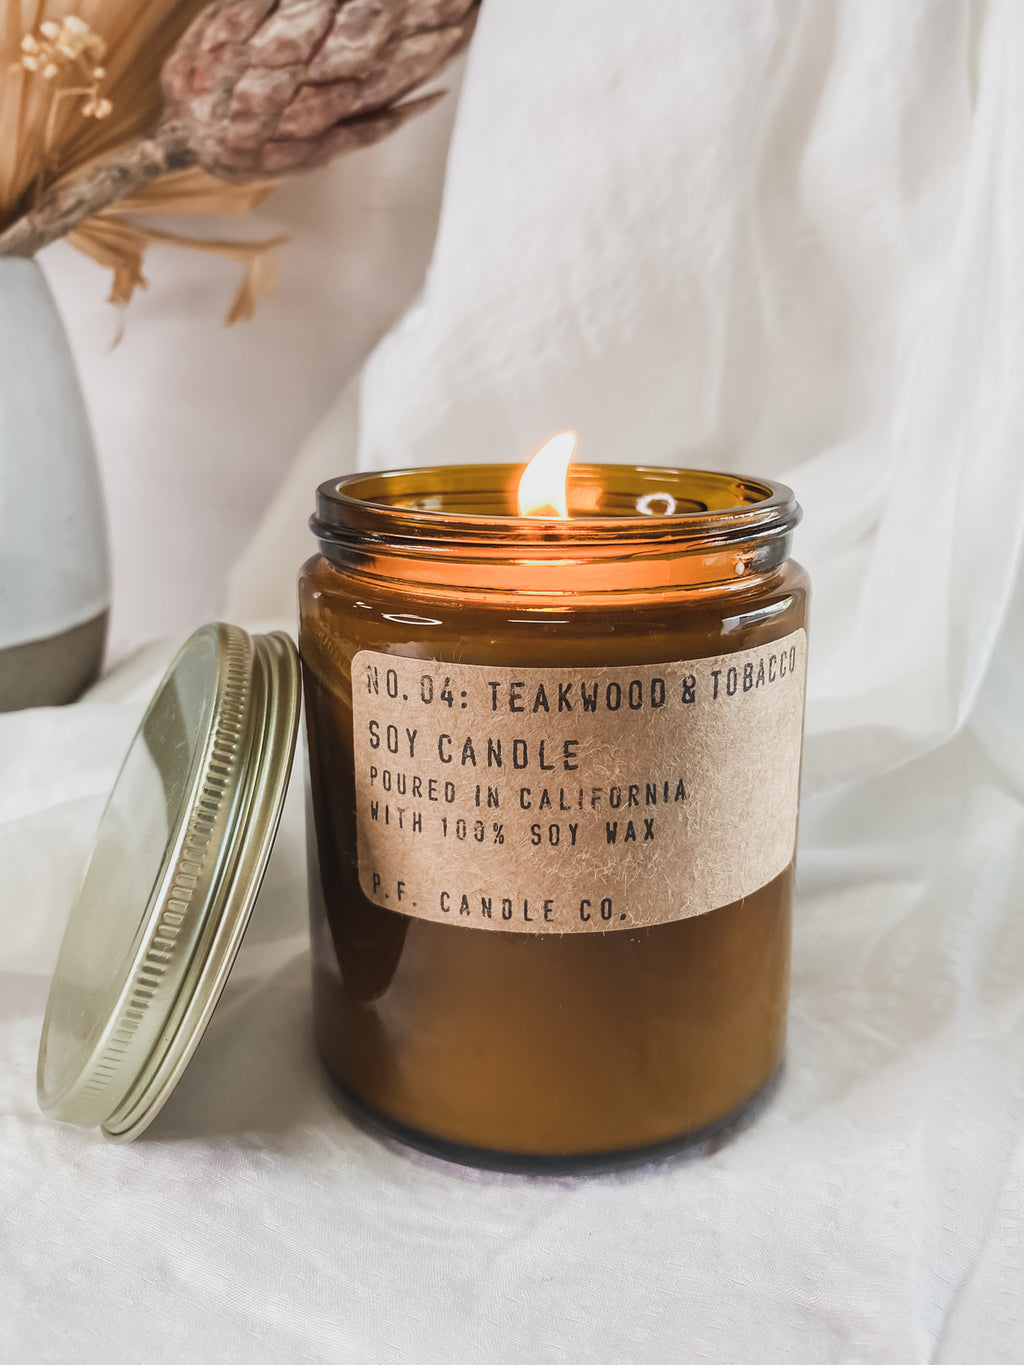 Teakwood & Tobacco Candle - Stitch And Feather